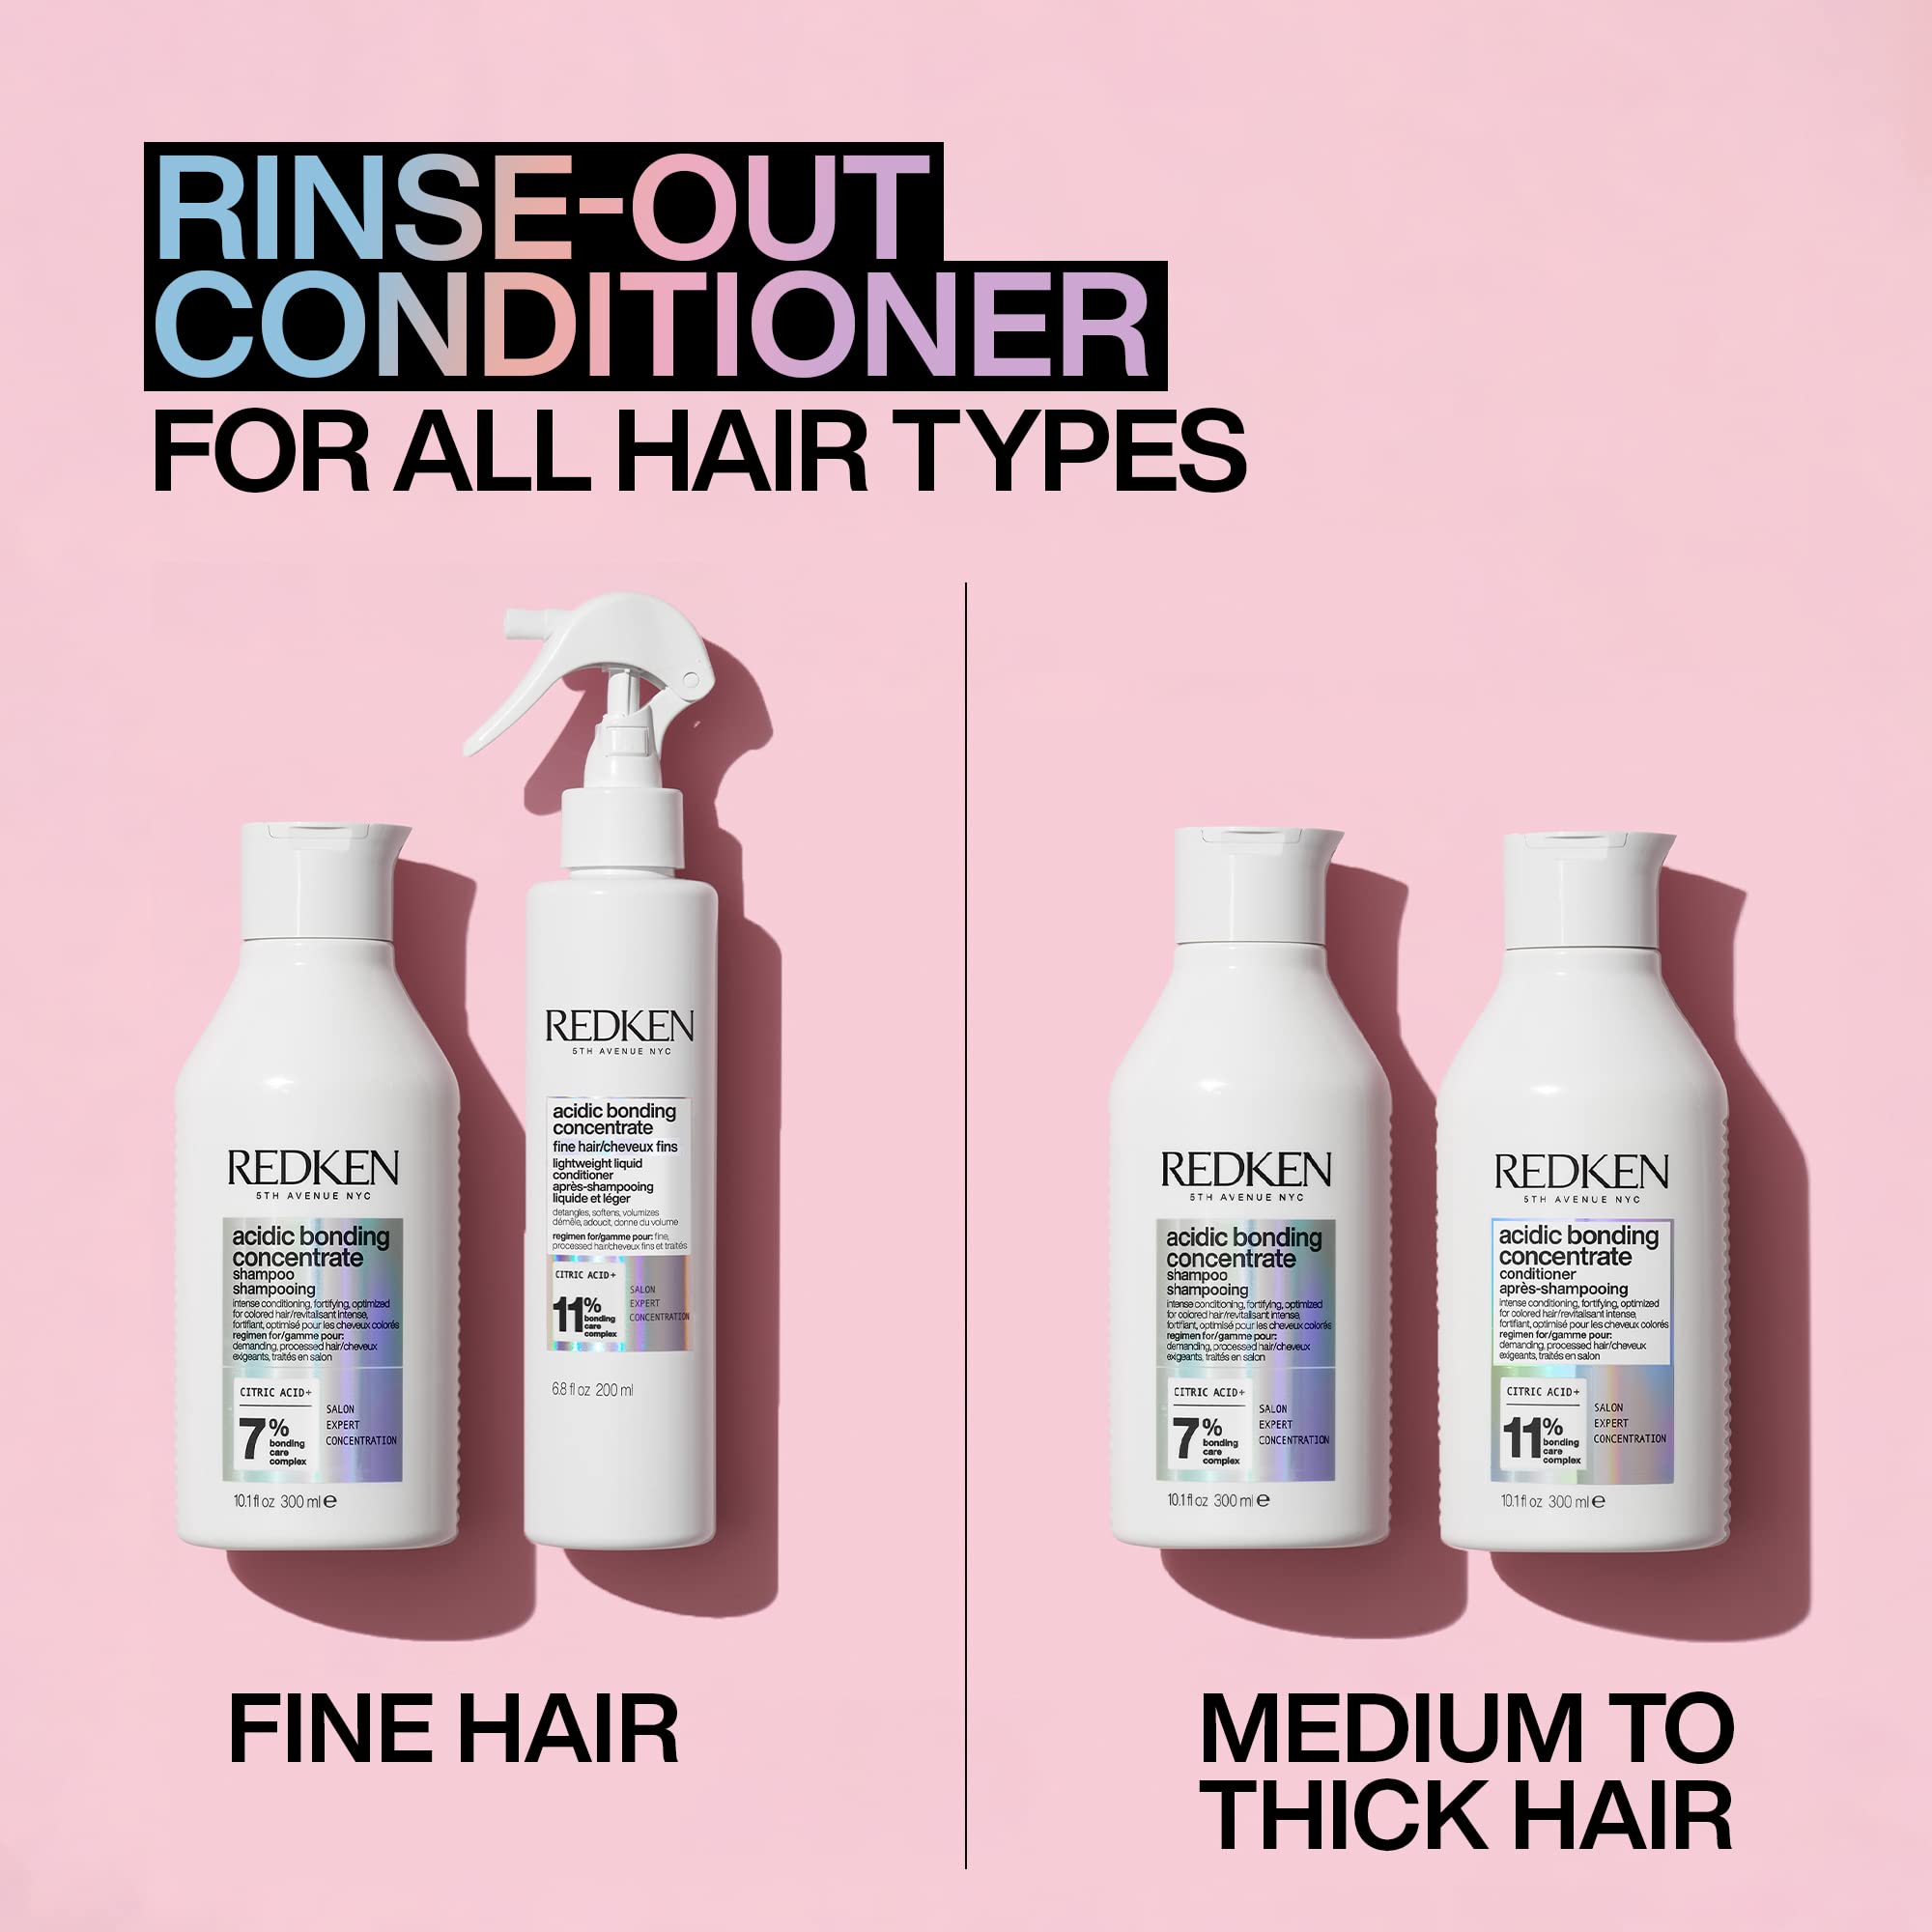 Redken Bonding Lightweight Liquid Conditioner for Damaged Hair Repair | Volumize & Condition | Acidic Bonding Concentrate | Sulfate-Free Spray Conditioner | For Fine or Thin Hair